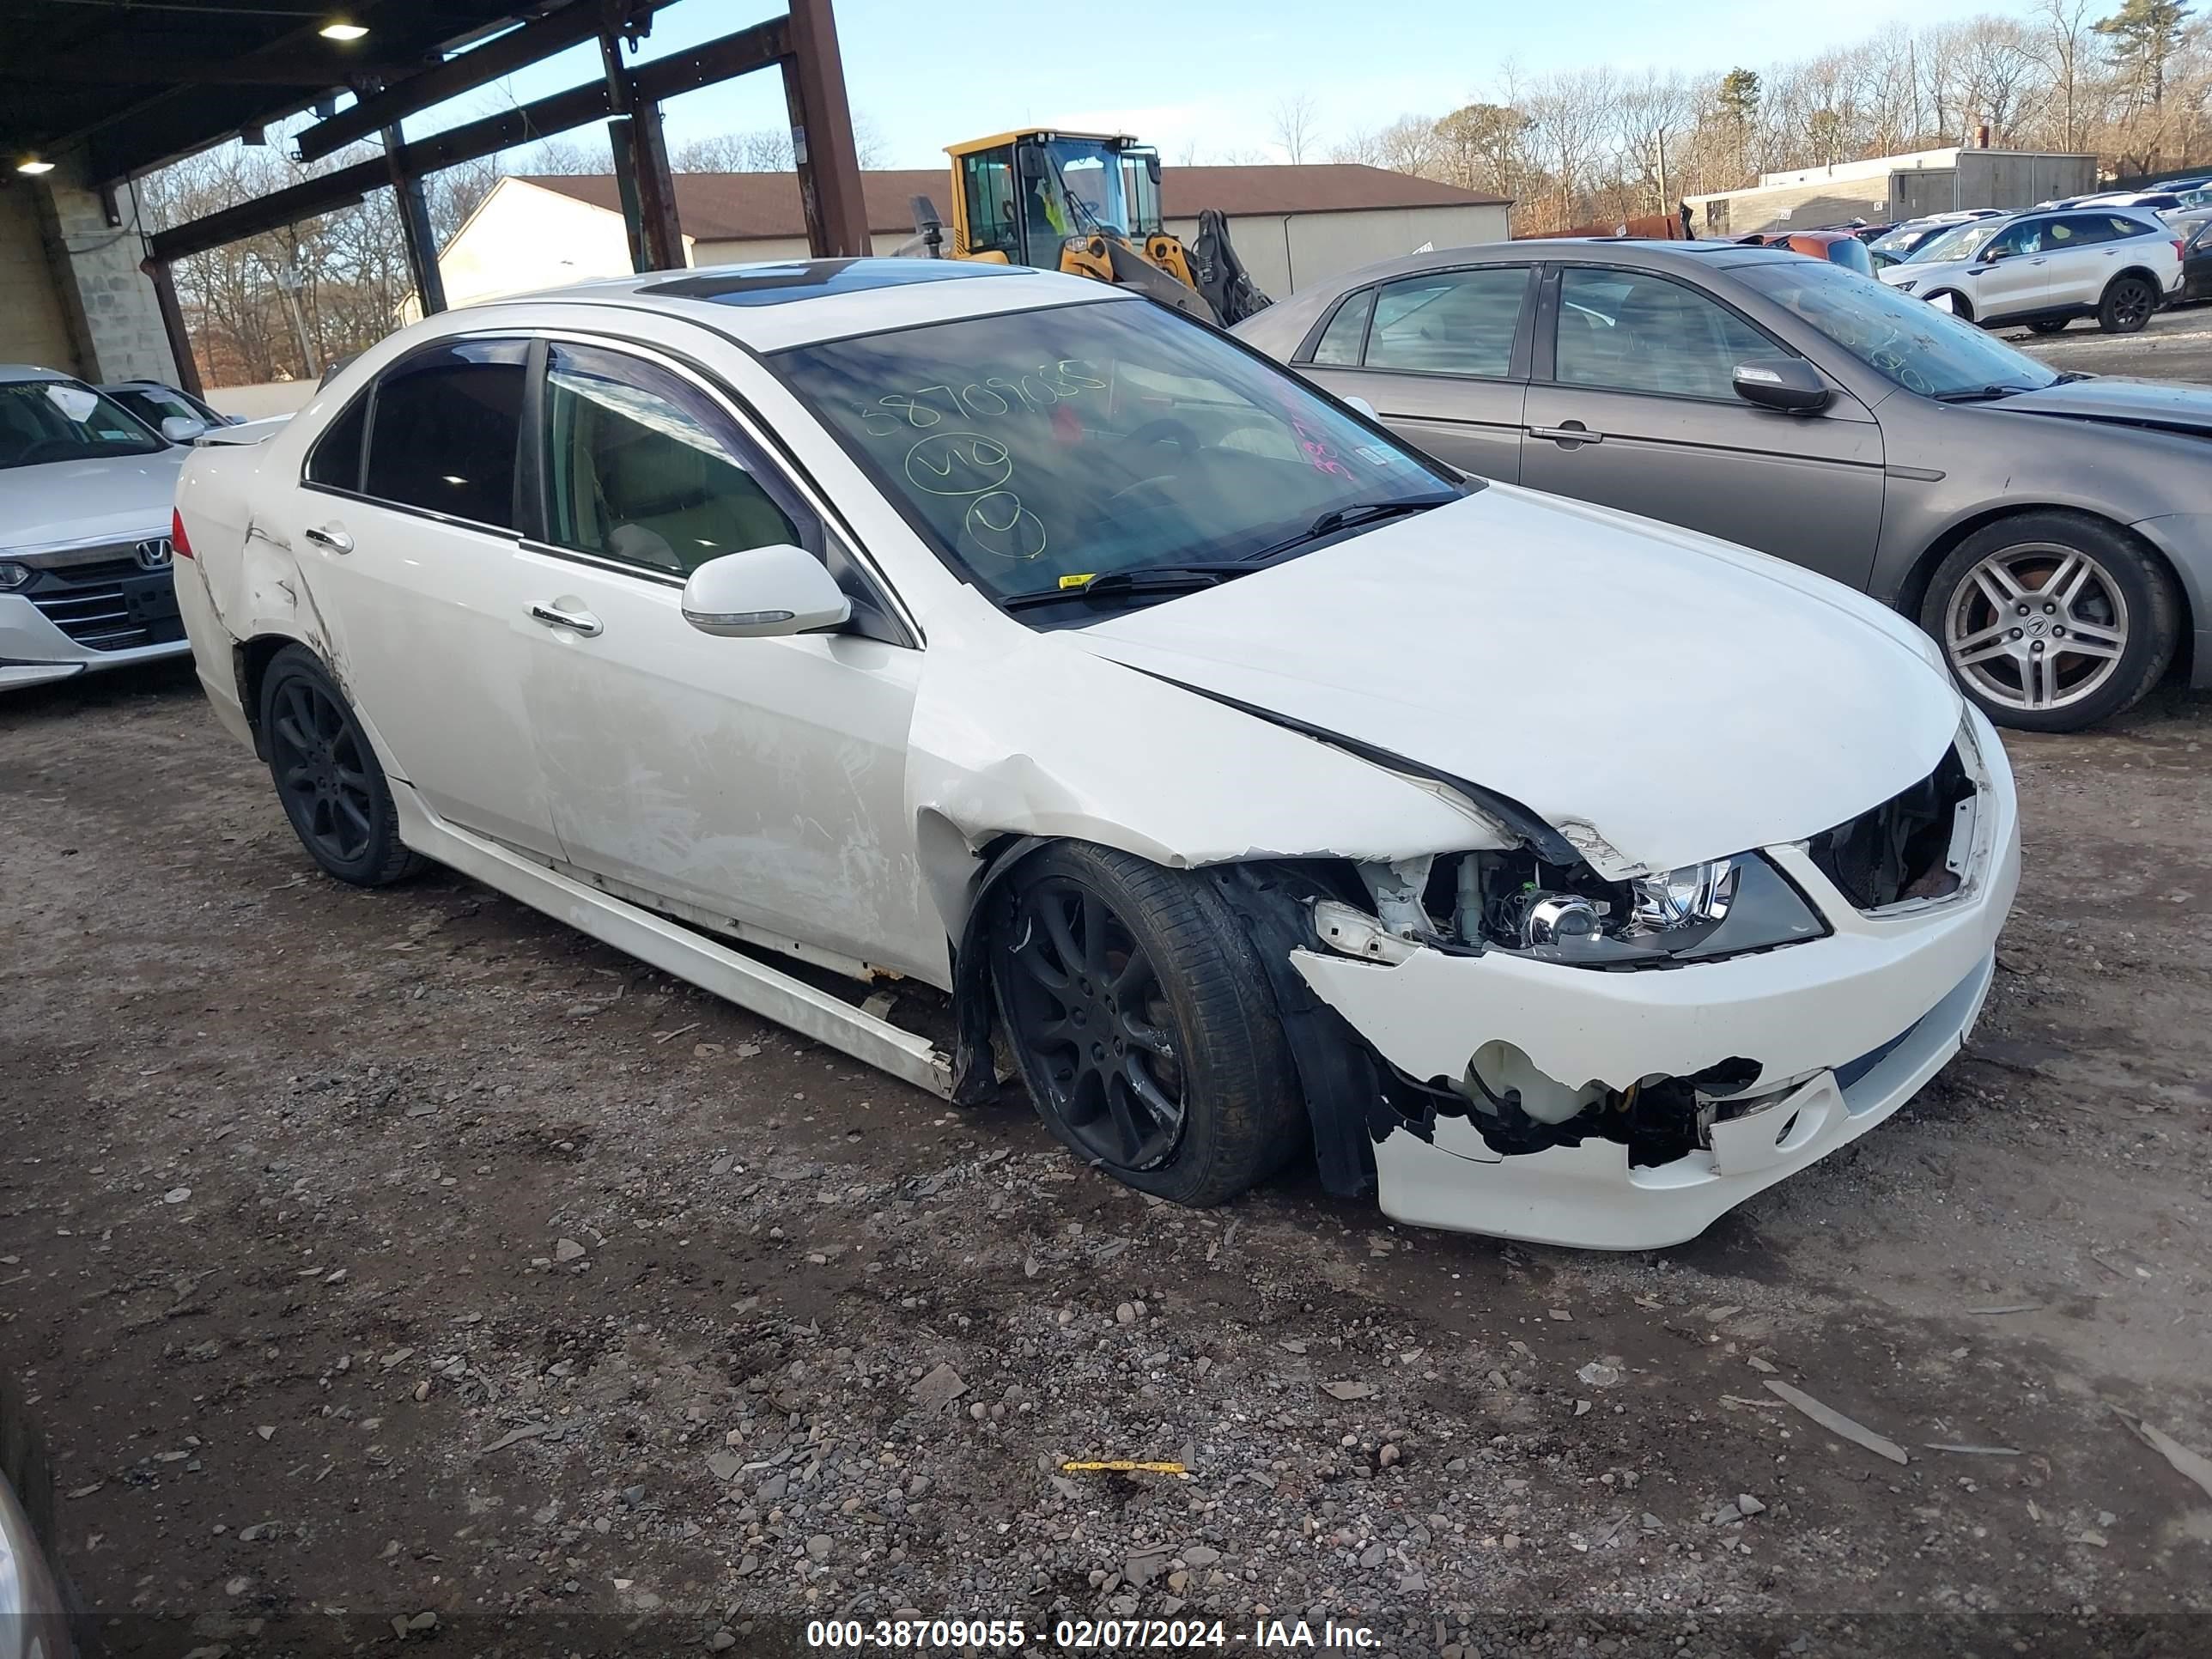 vin: JH4CL96886C032366 JH4CL96886C032366 2006 acura tsx 2400 for Sale in 11763, 171 Peconic Ave, Medford, USA